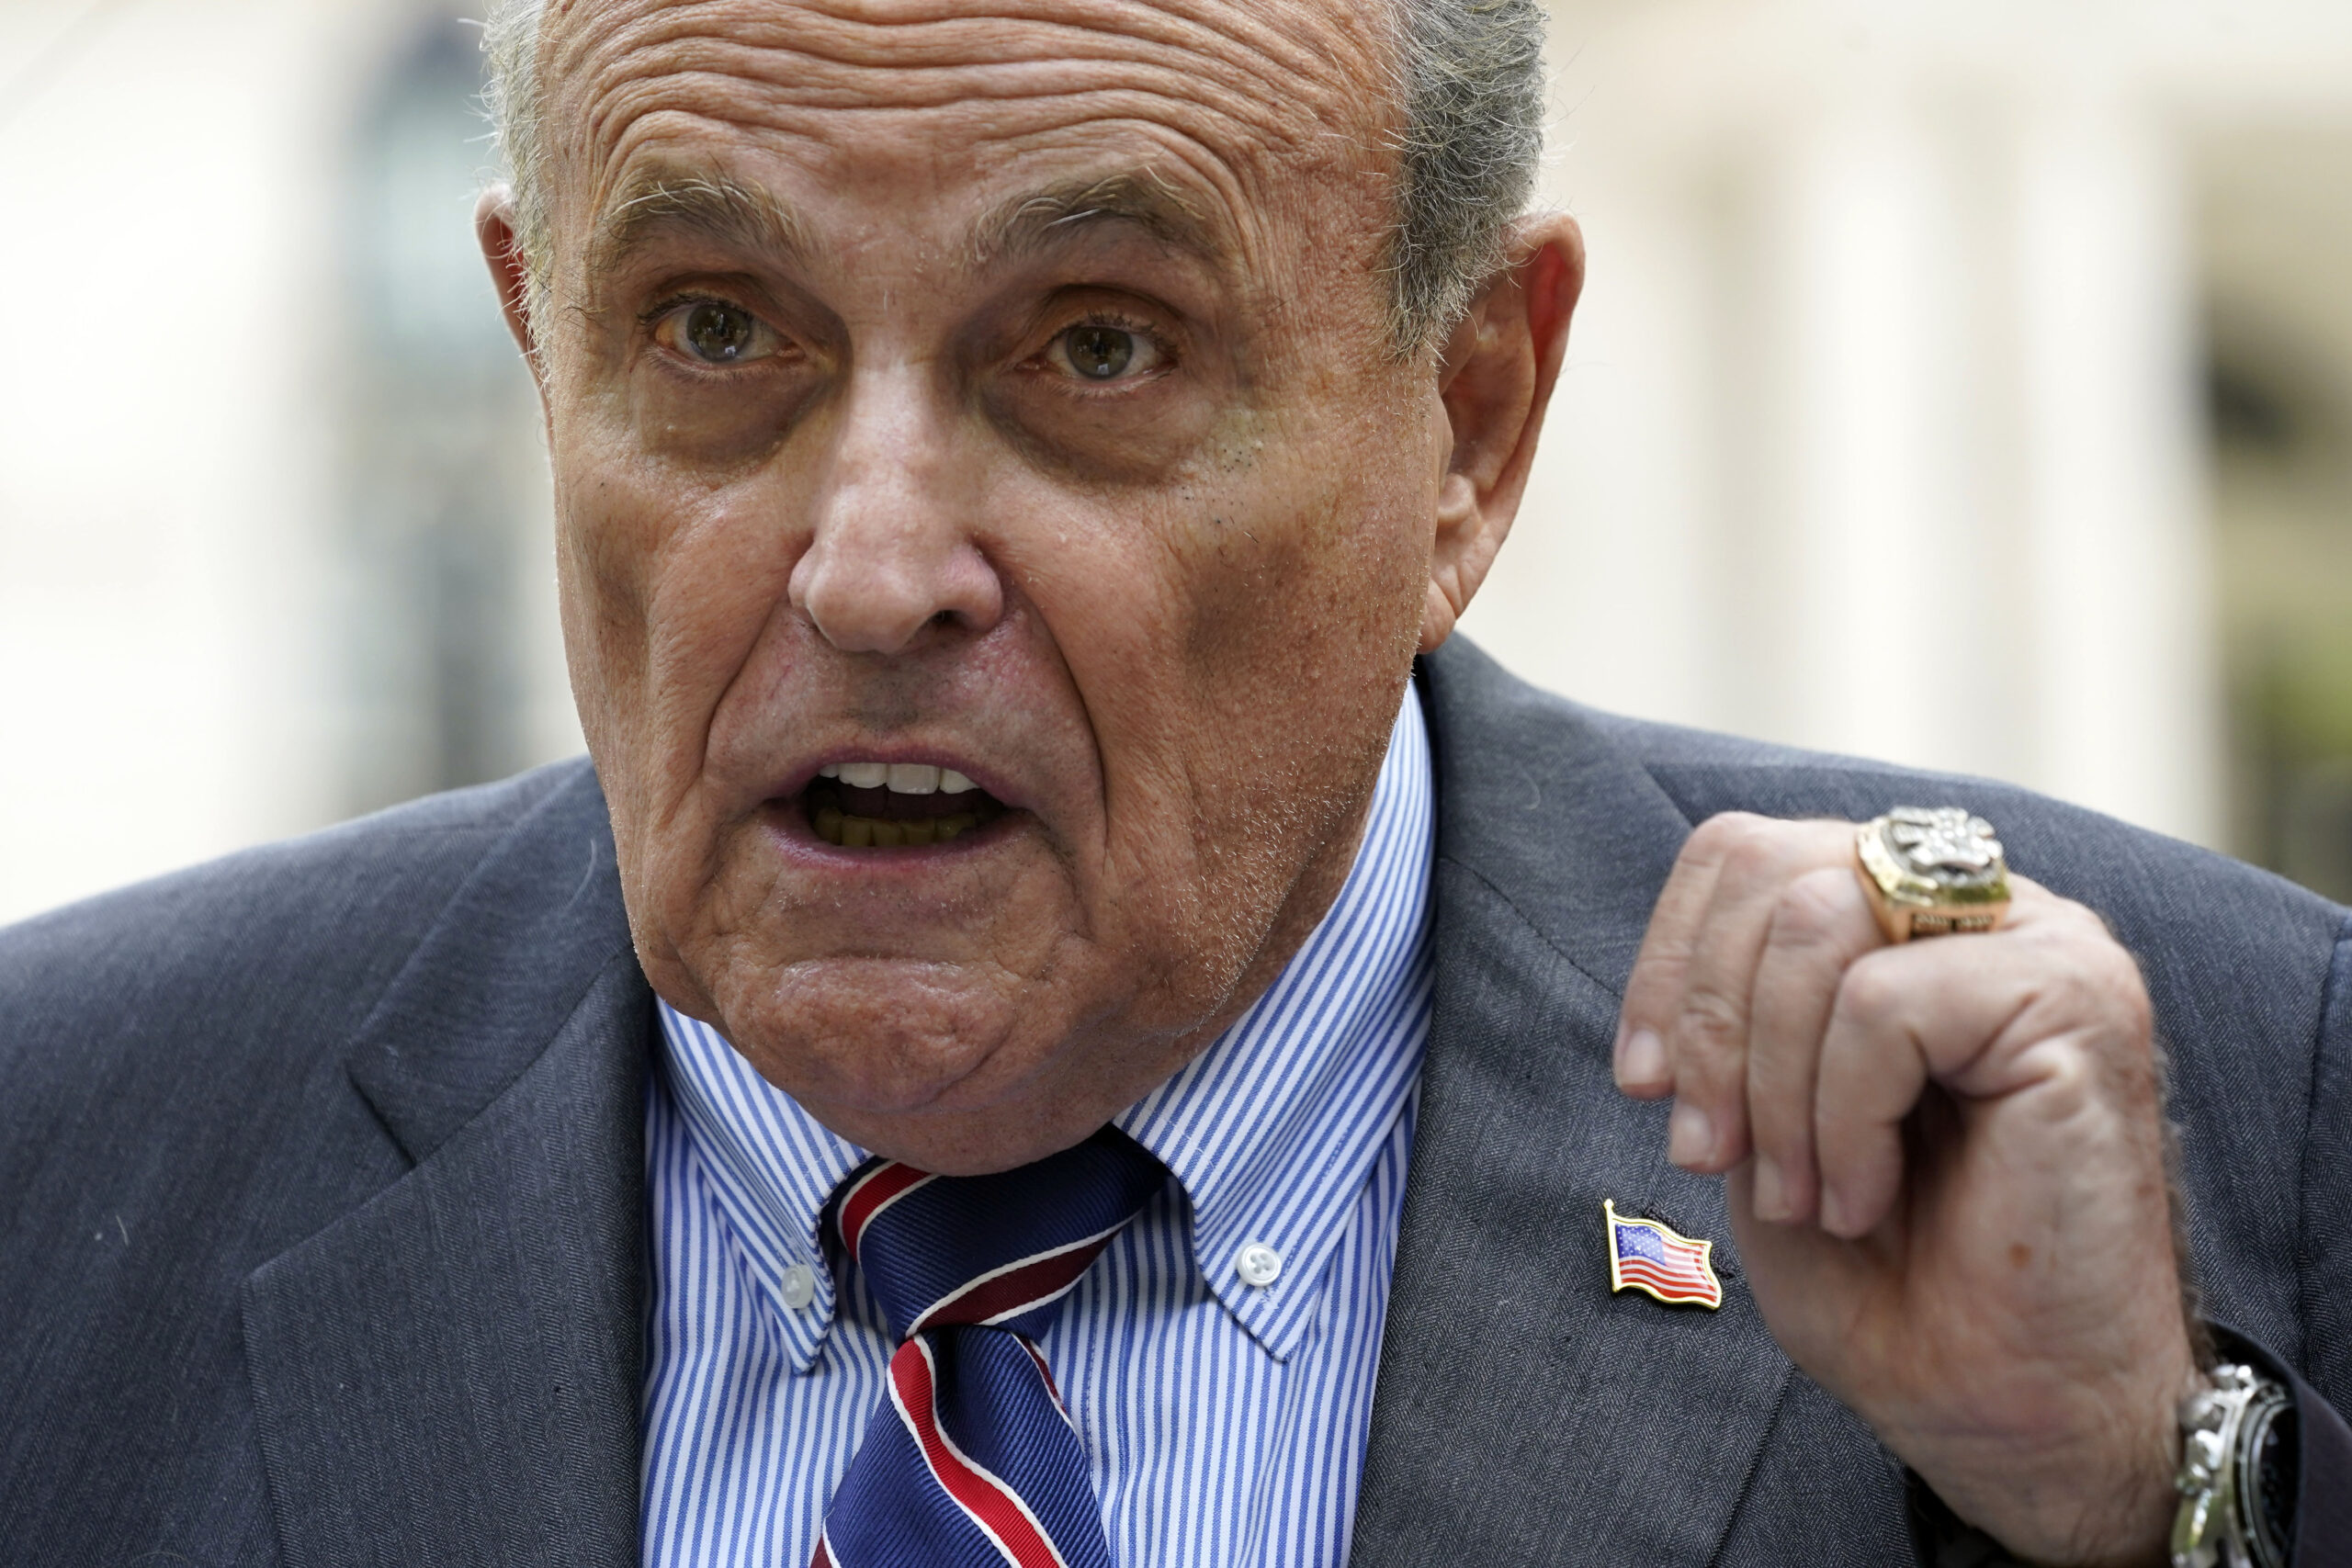 Rudy Giuliani Ranted About ‘Freakin Arabs’ and Told Jews to ‘Get Over the Passover. It Was Like 3,000 Years Ago’: New Lawsuit